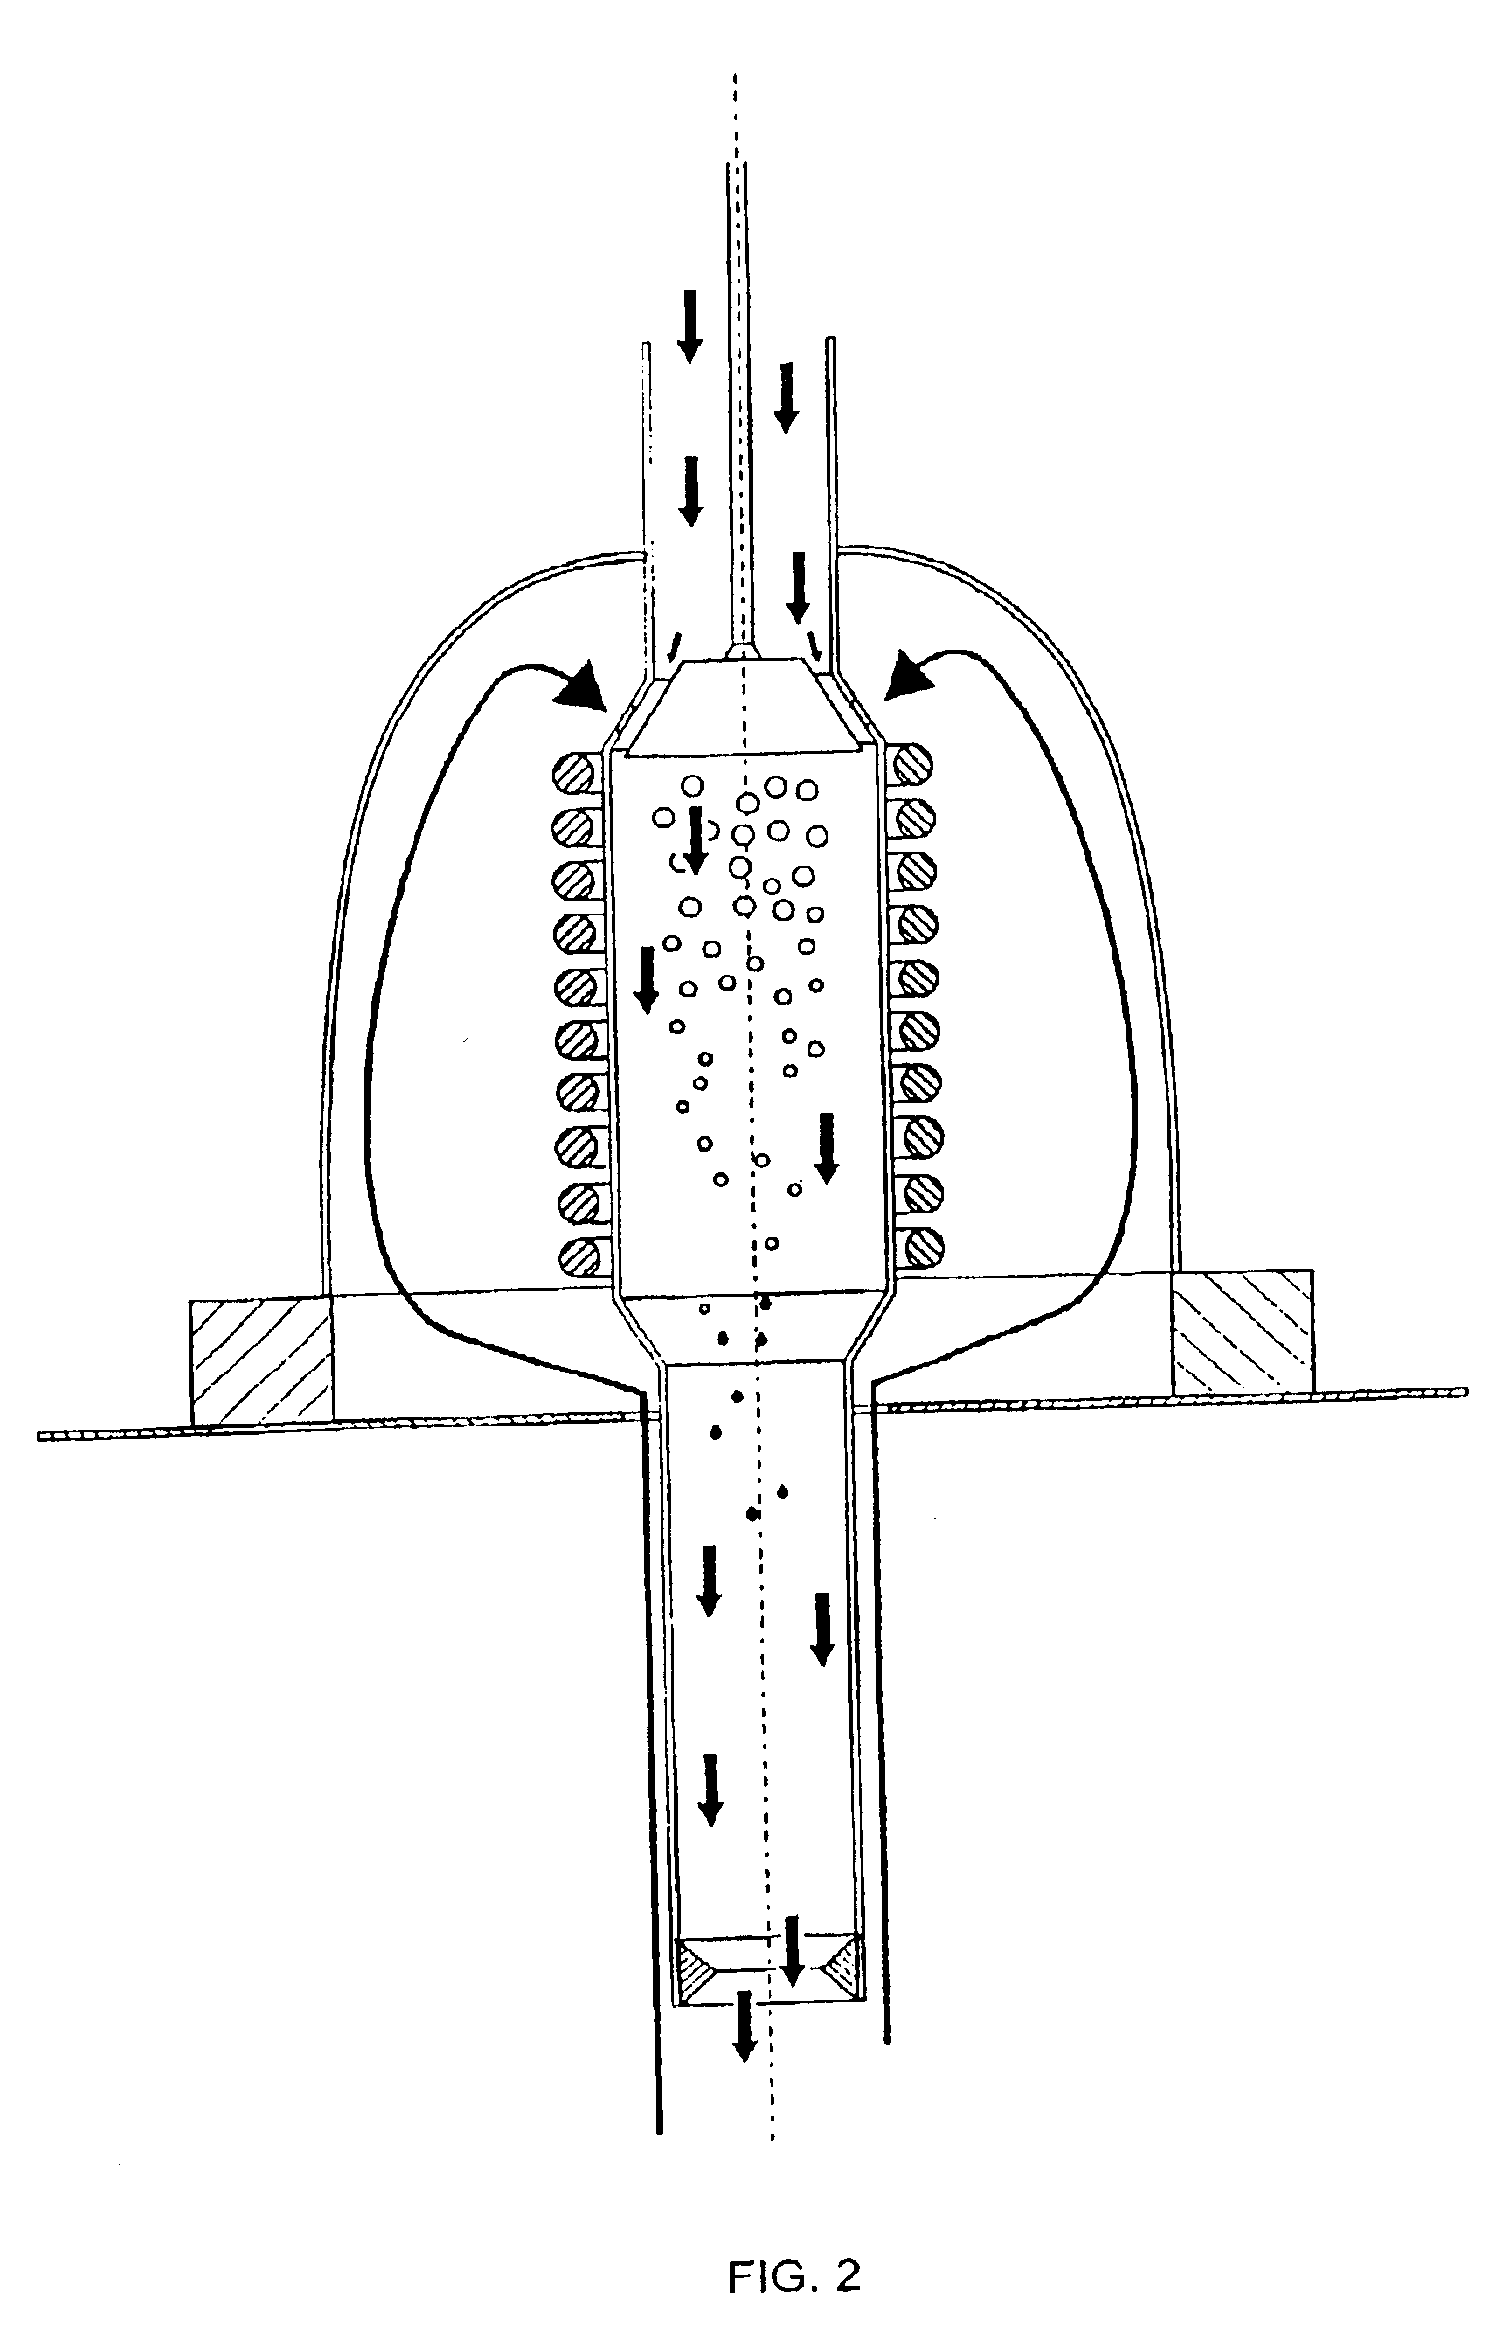 Method, apparatus and system for the condensation of vapors and gases